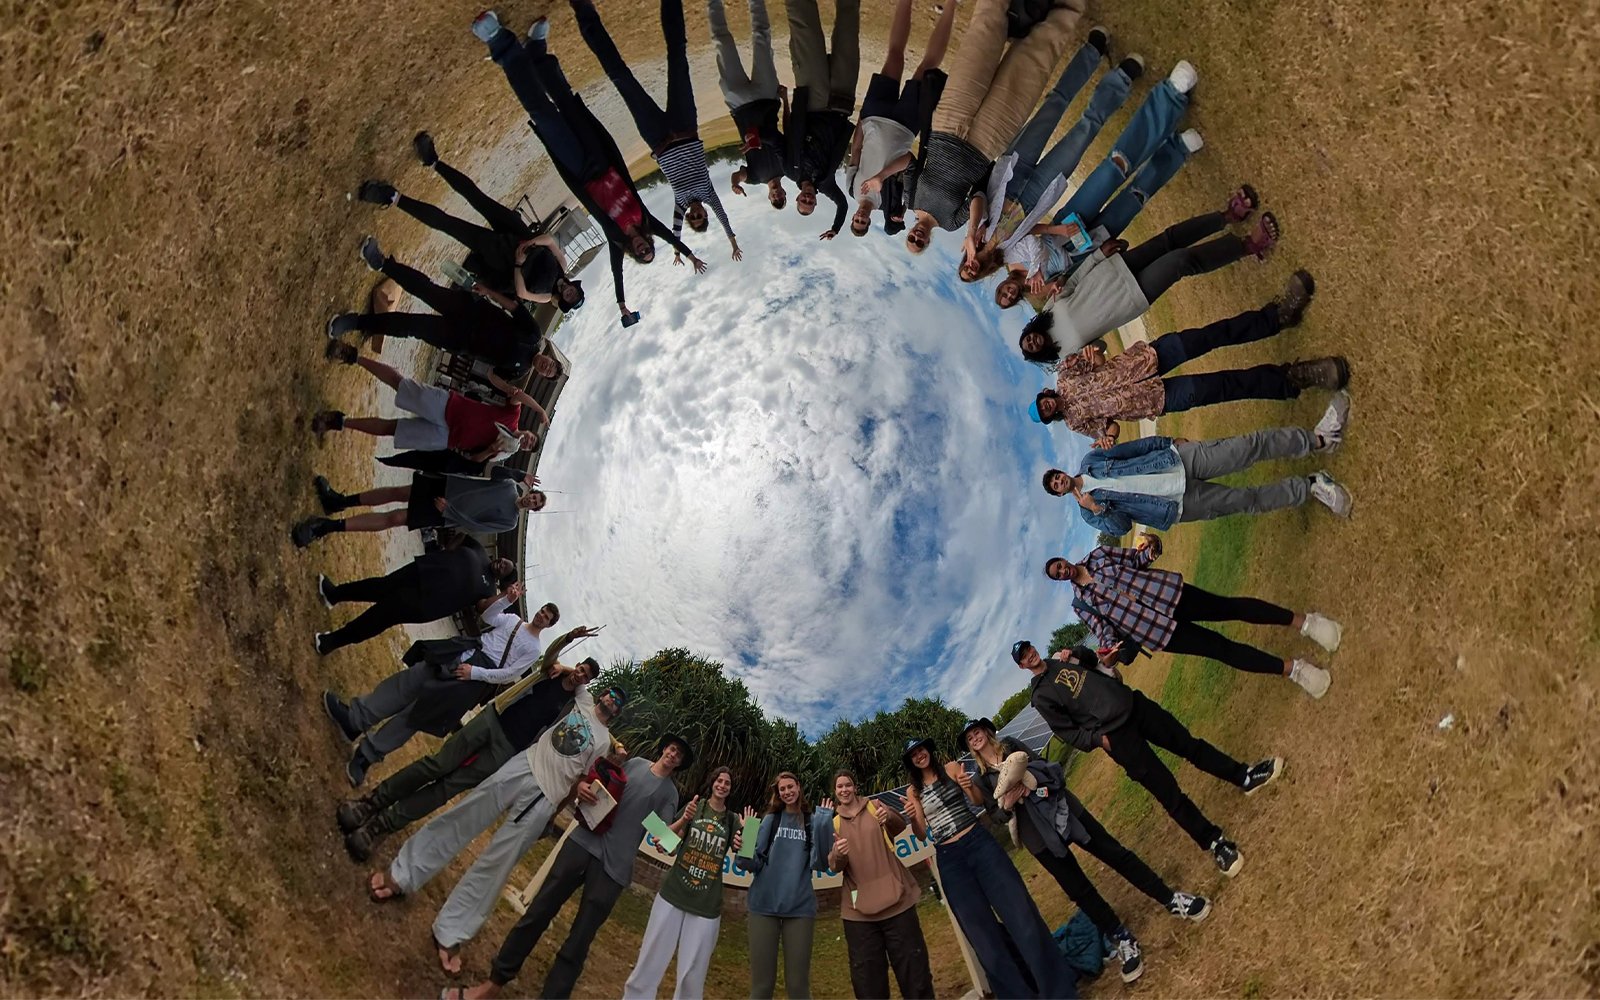 Group photo of students (edited so that students are in a circle facing inward with the sky at the center)